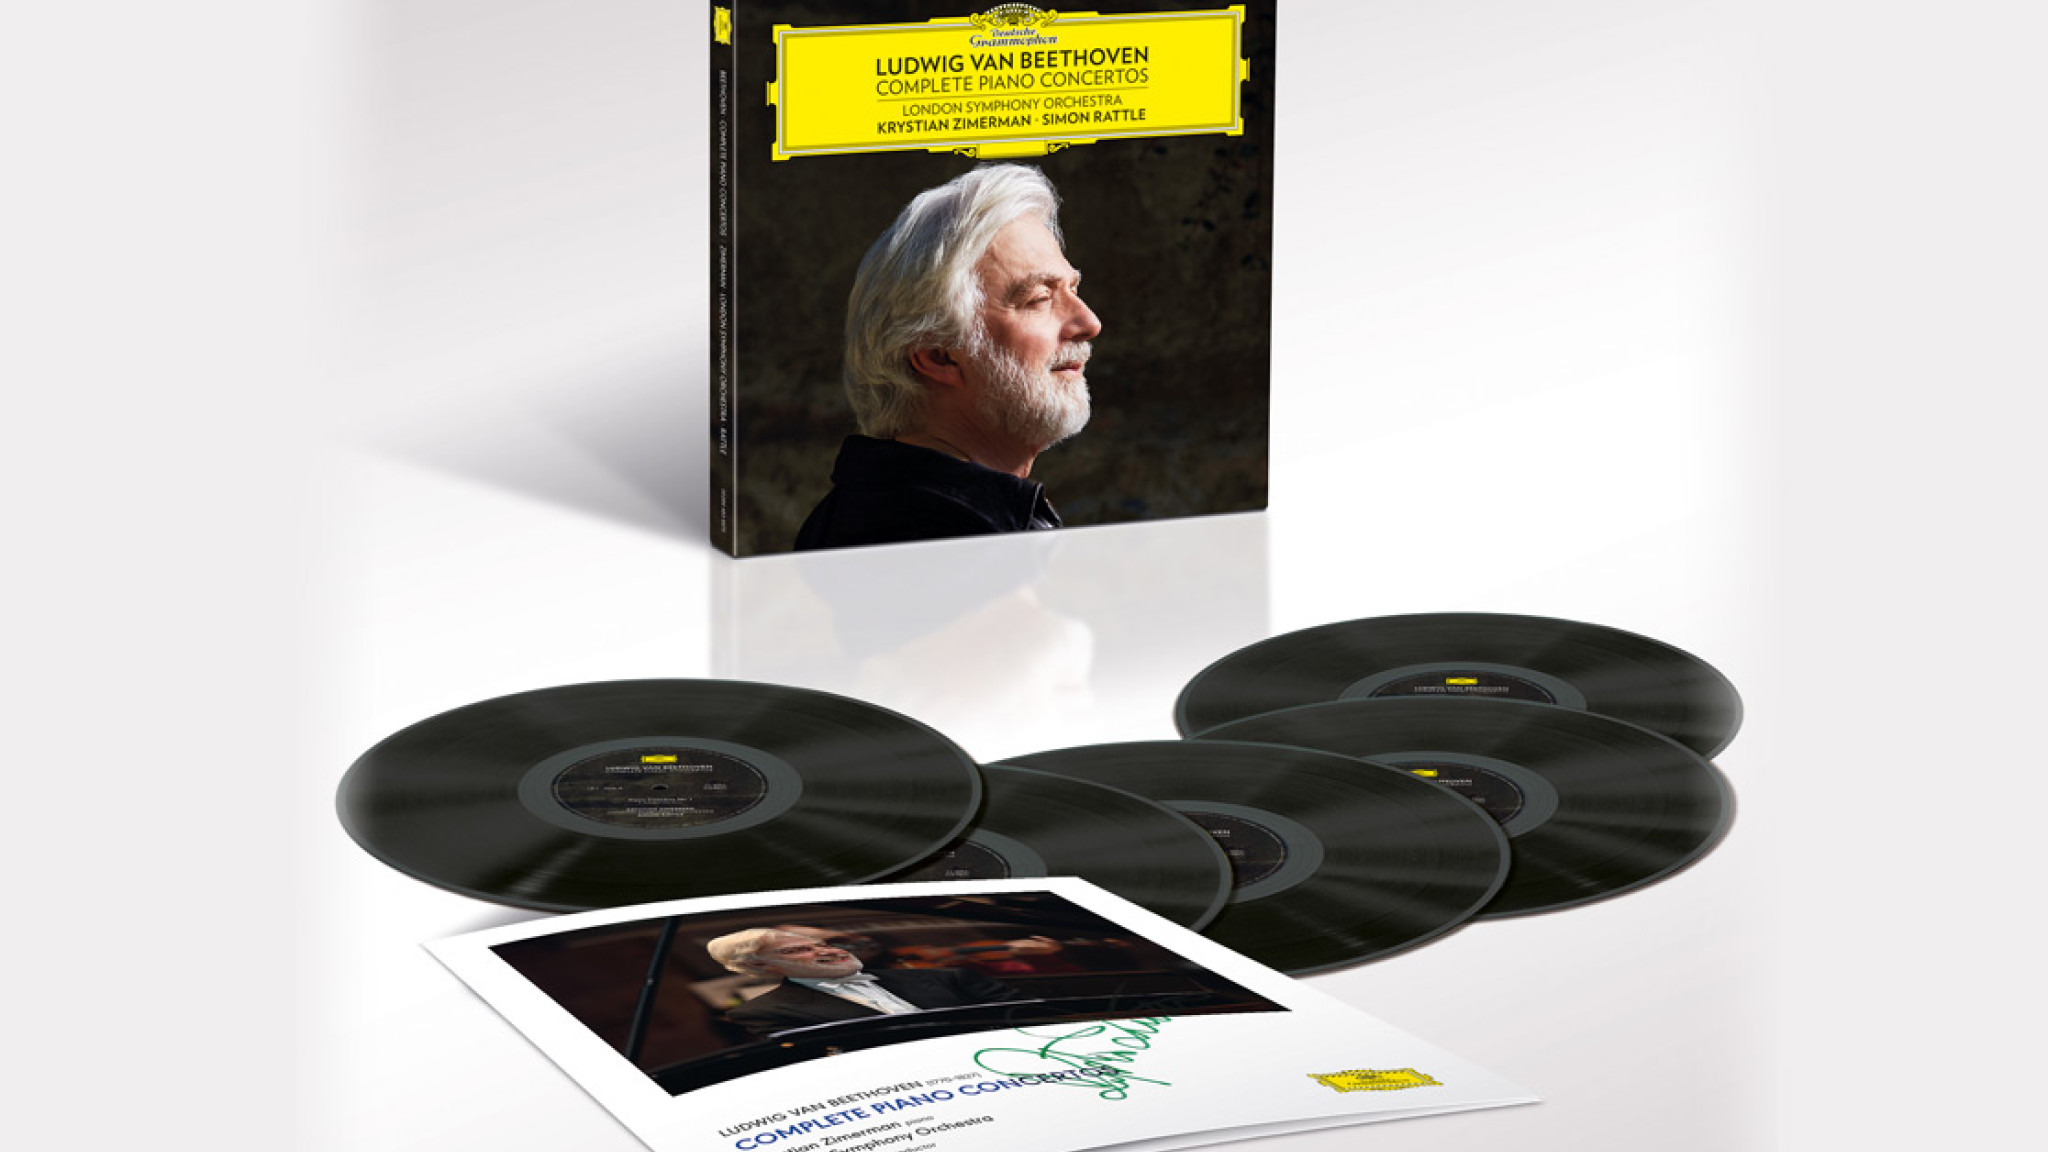 Krystian Zimerman presents limited signed LP edition of Complete Beethoven Piano Concertos